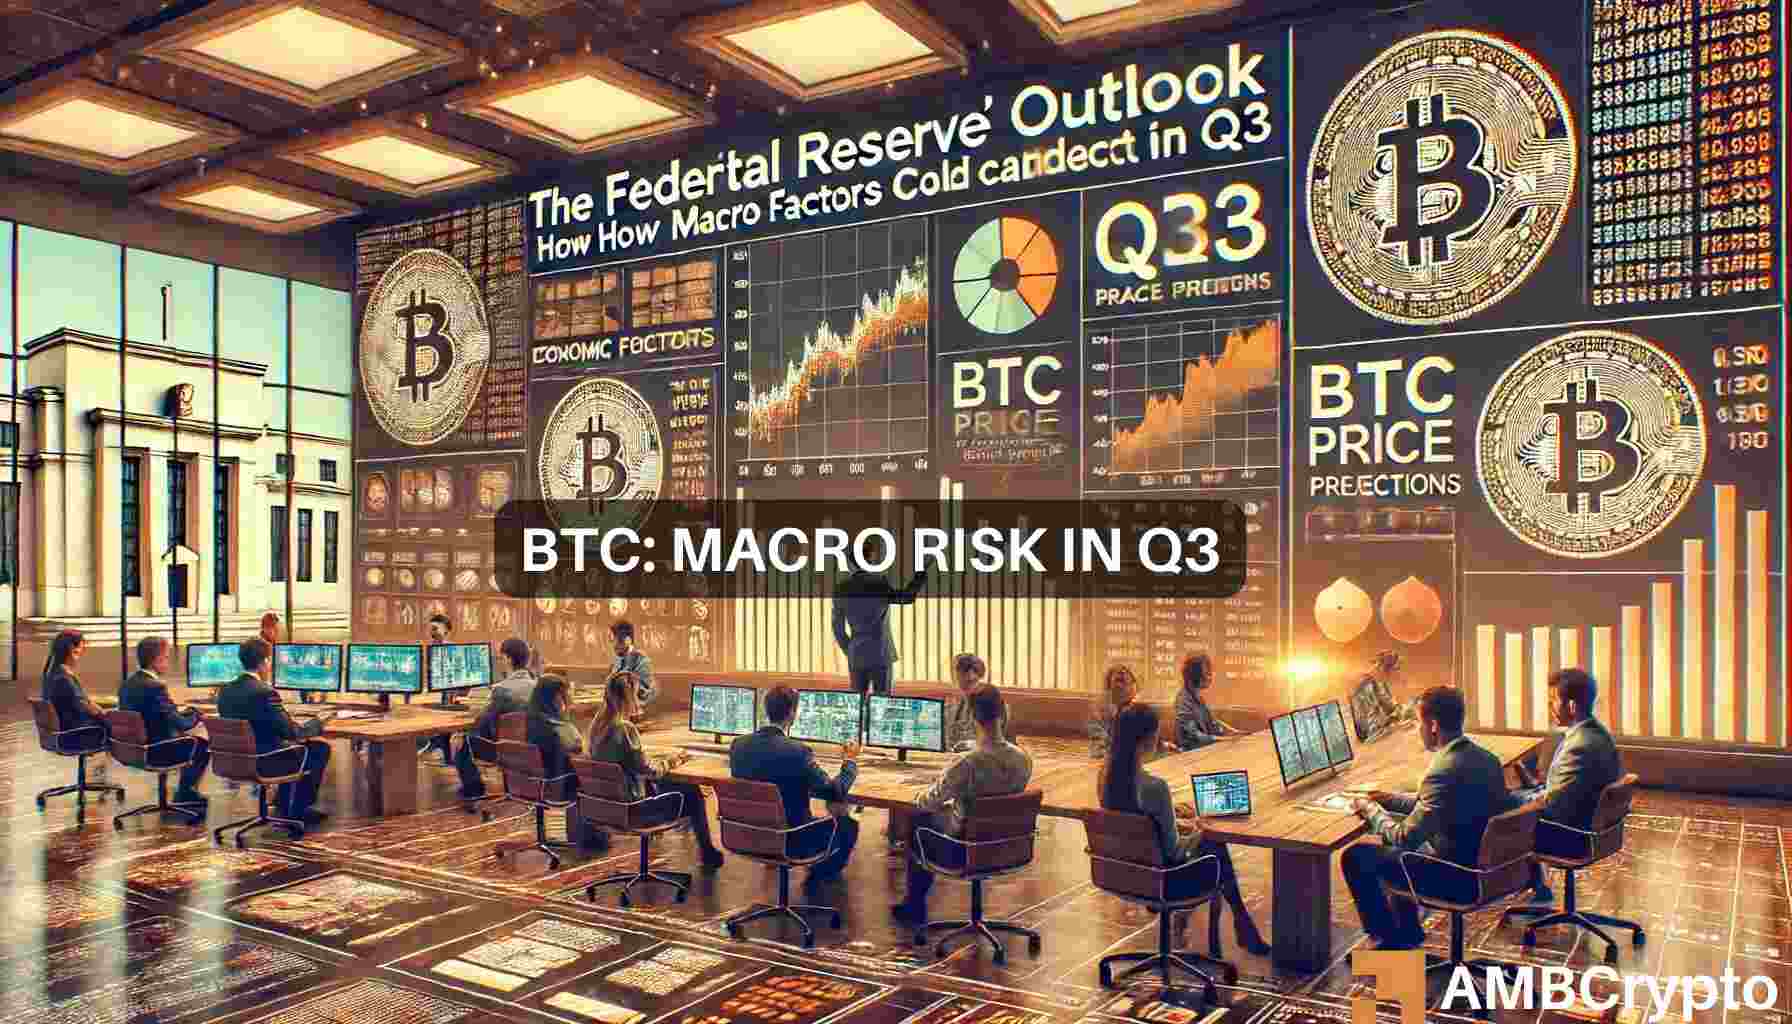 Bitcoin in Q3: Does the Fed’s rate stance signal trouble for BTC?